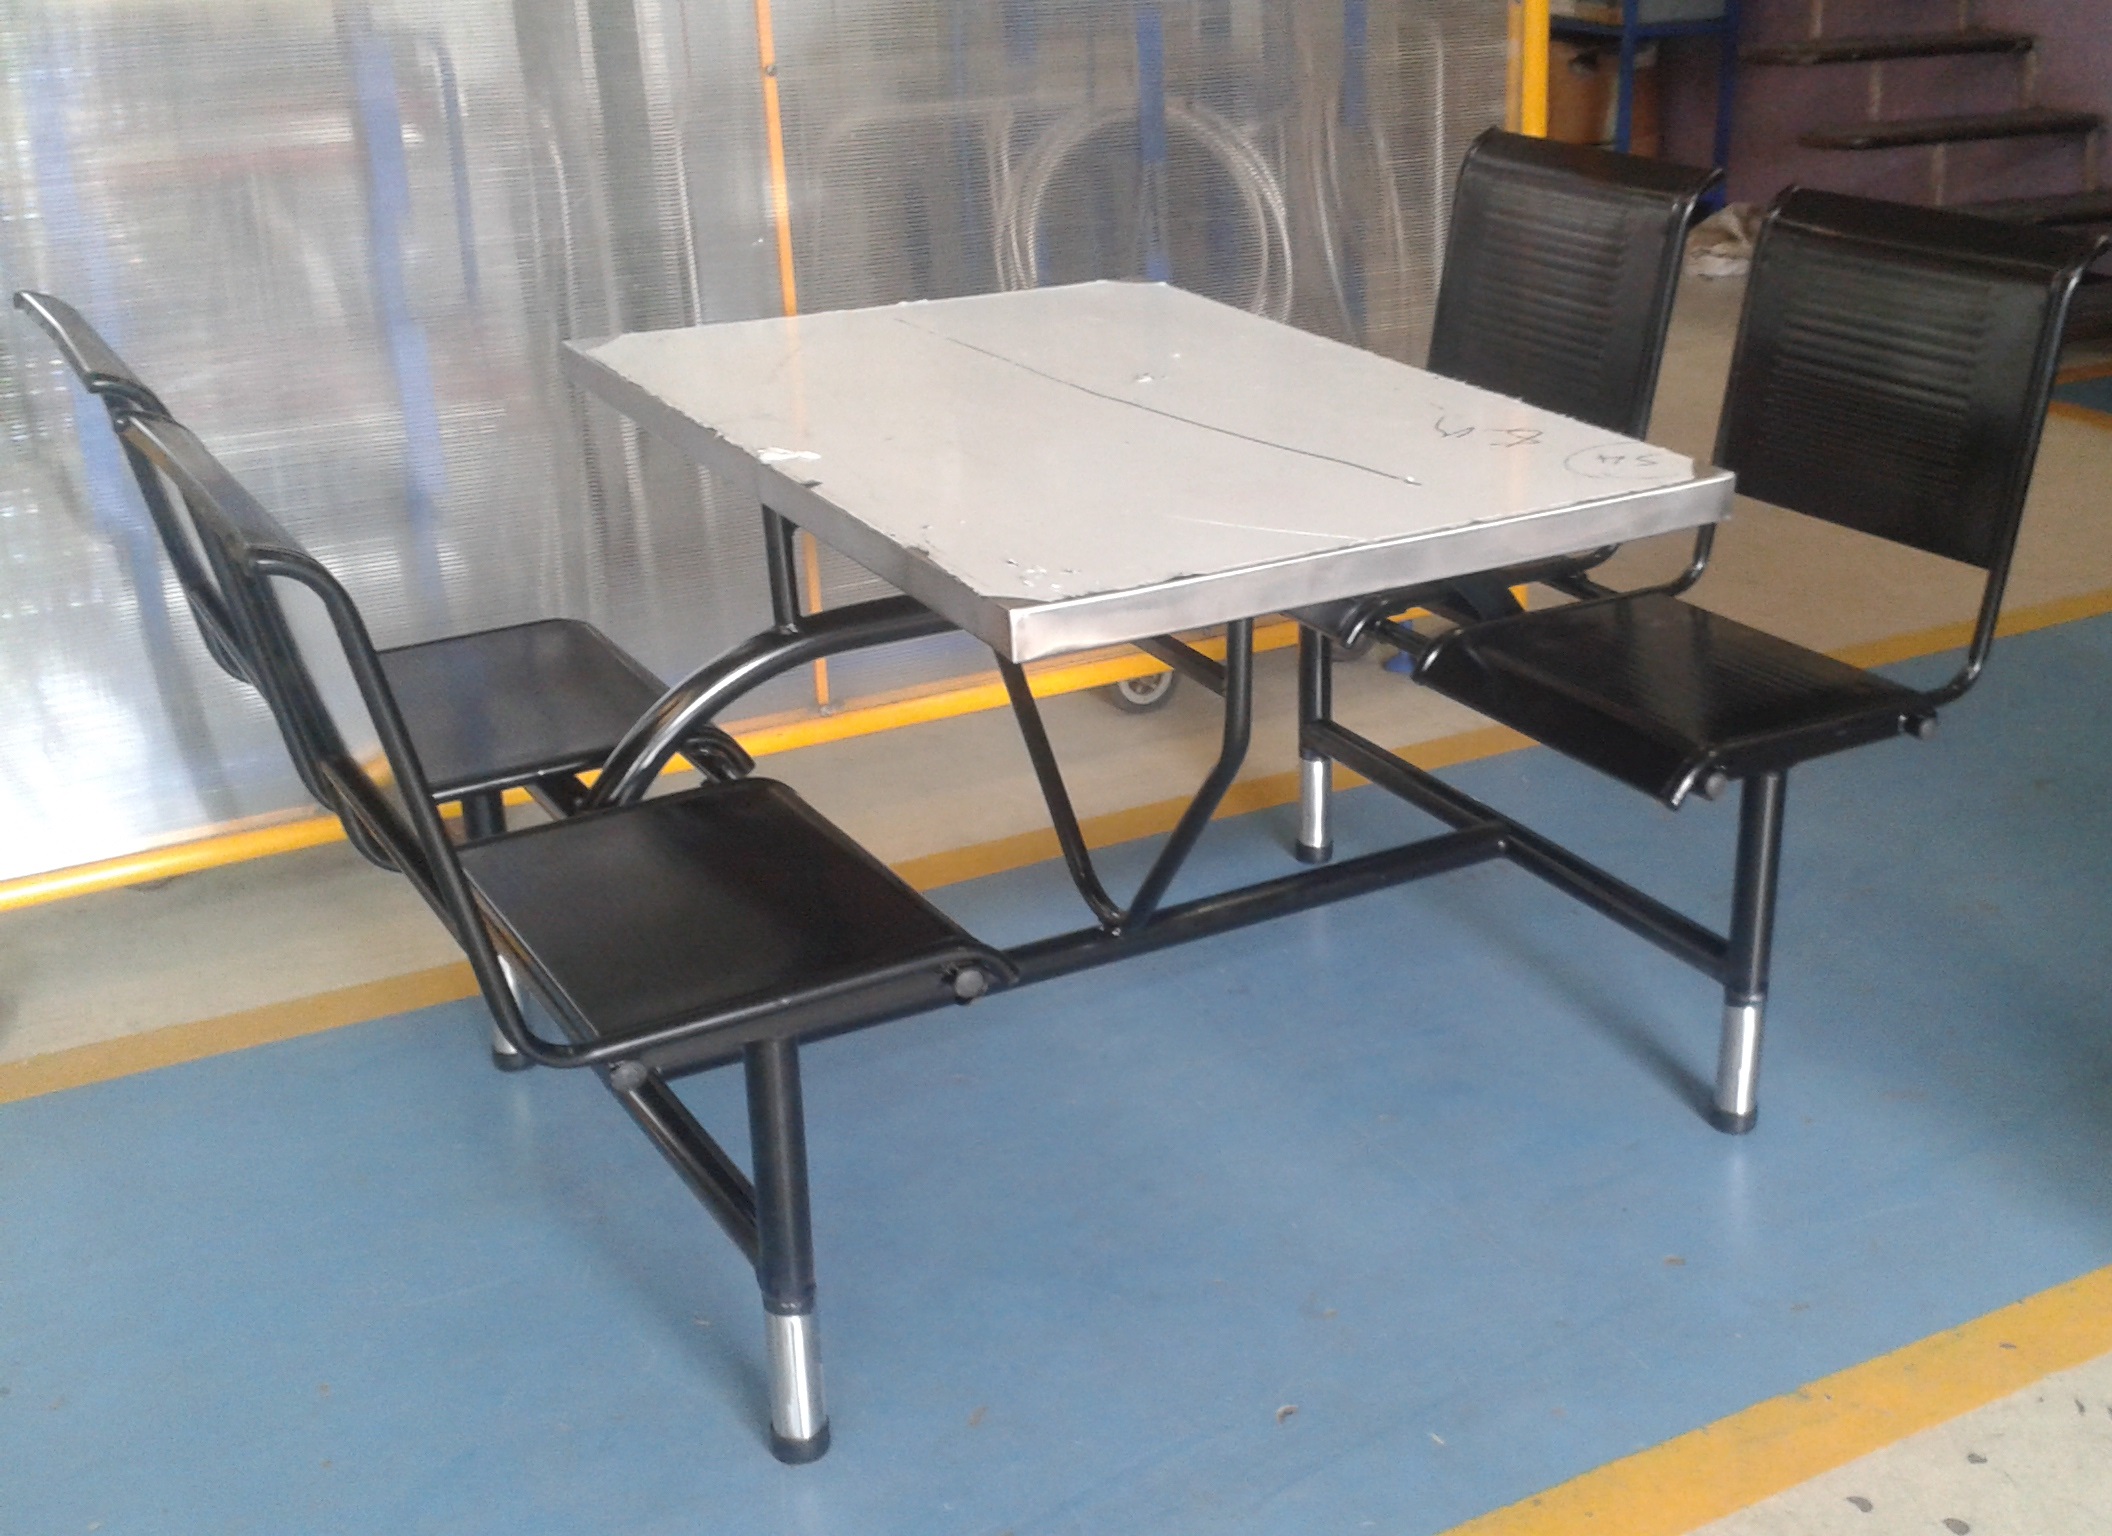 4 SEATER DINING TABLE – Fixed Chair Type